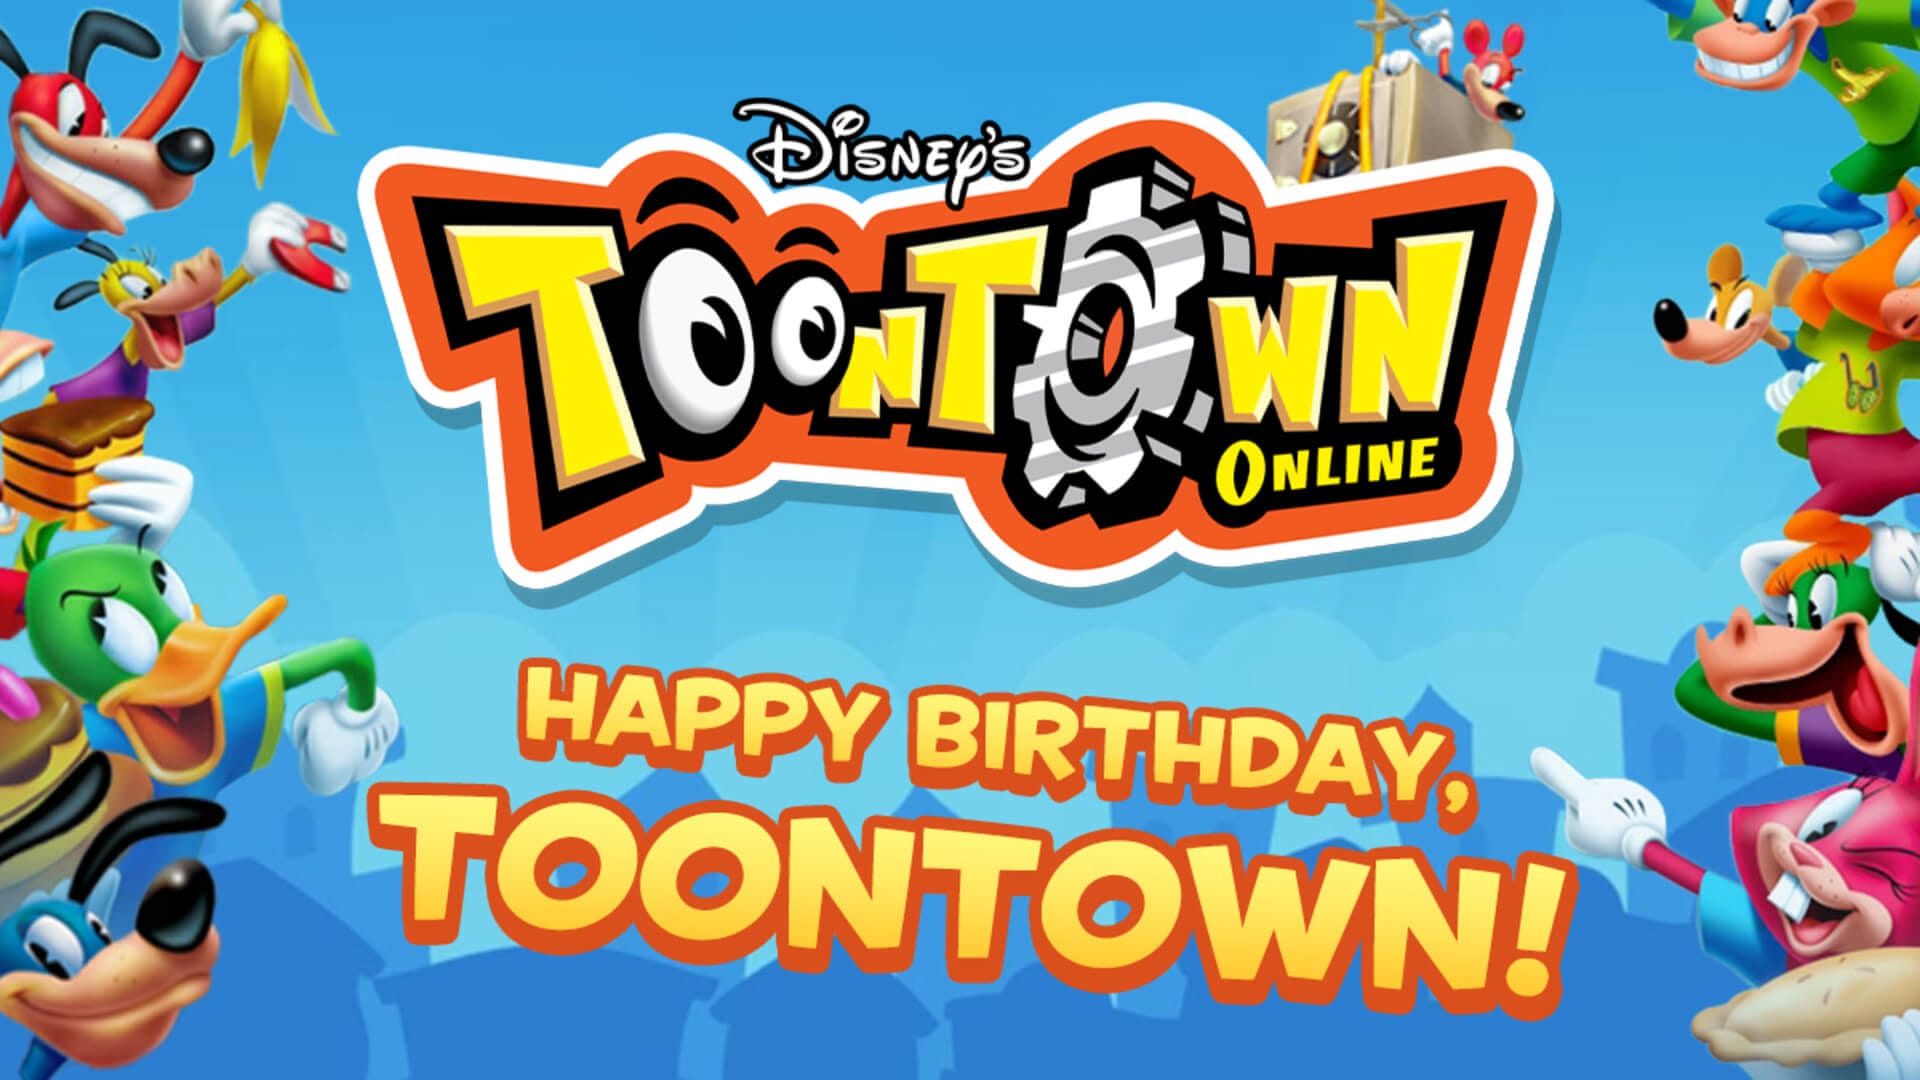 A celebration image for the 18th birthday of Toontown.